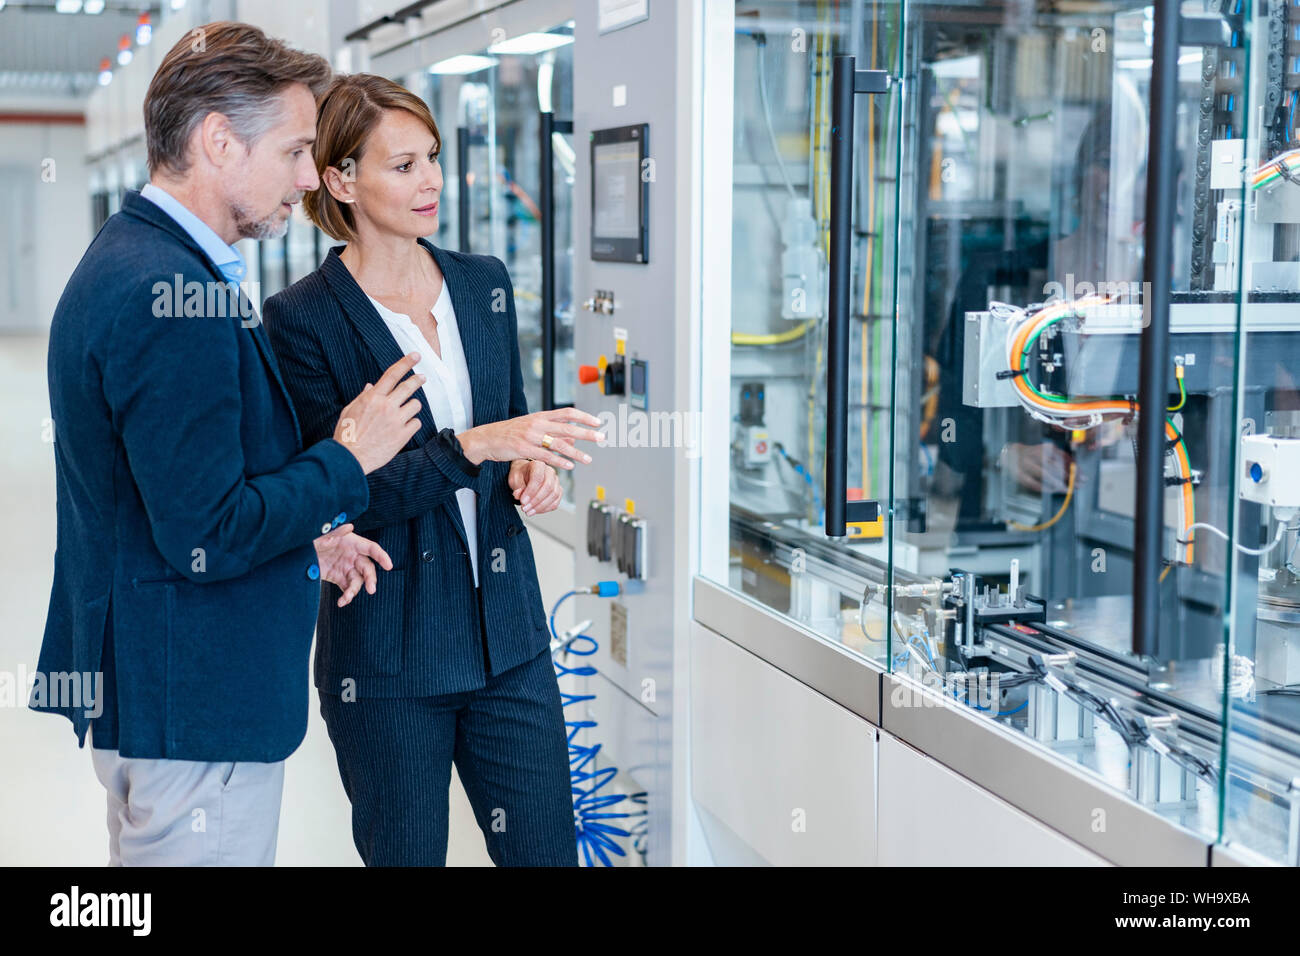 Businessman and businesswoman looking at a machine in a modern factory hall Stock Photo